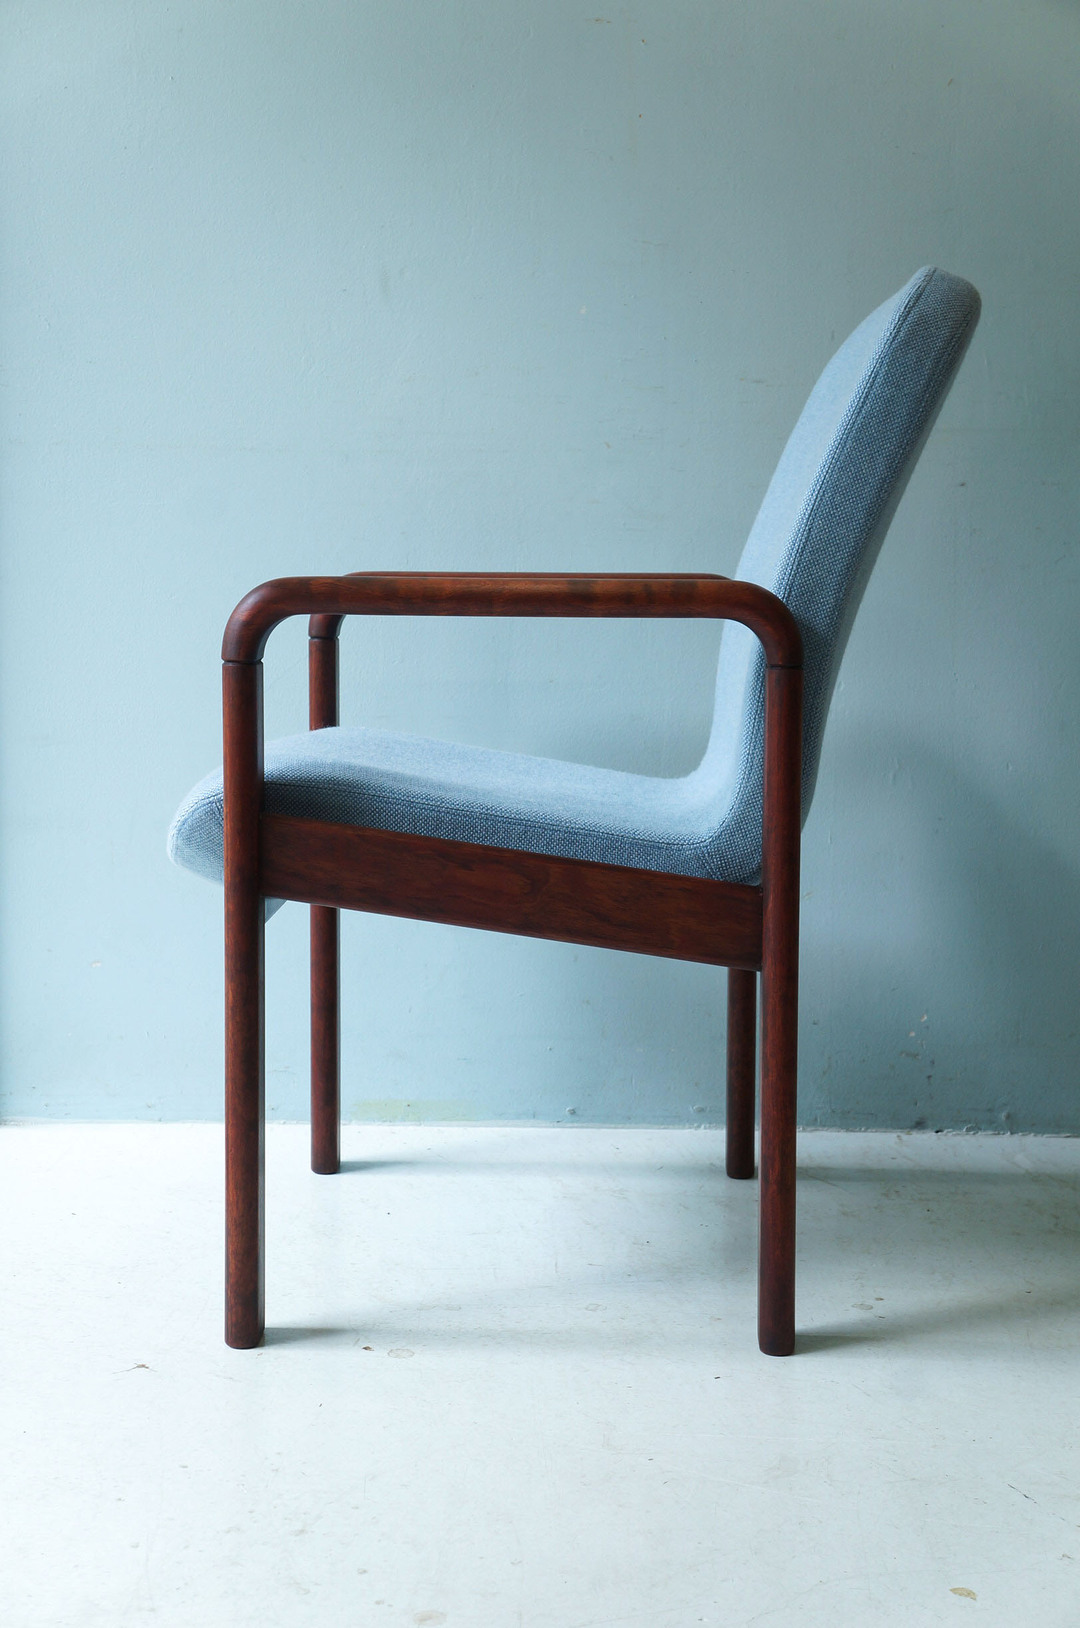 Danish Vintage Dyrlund Arm Chair/デンマーク ヴィンテージ デューロン アームチェア 北欧家具 ライトブルー